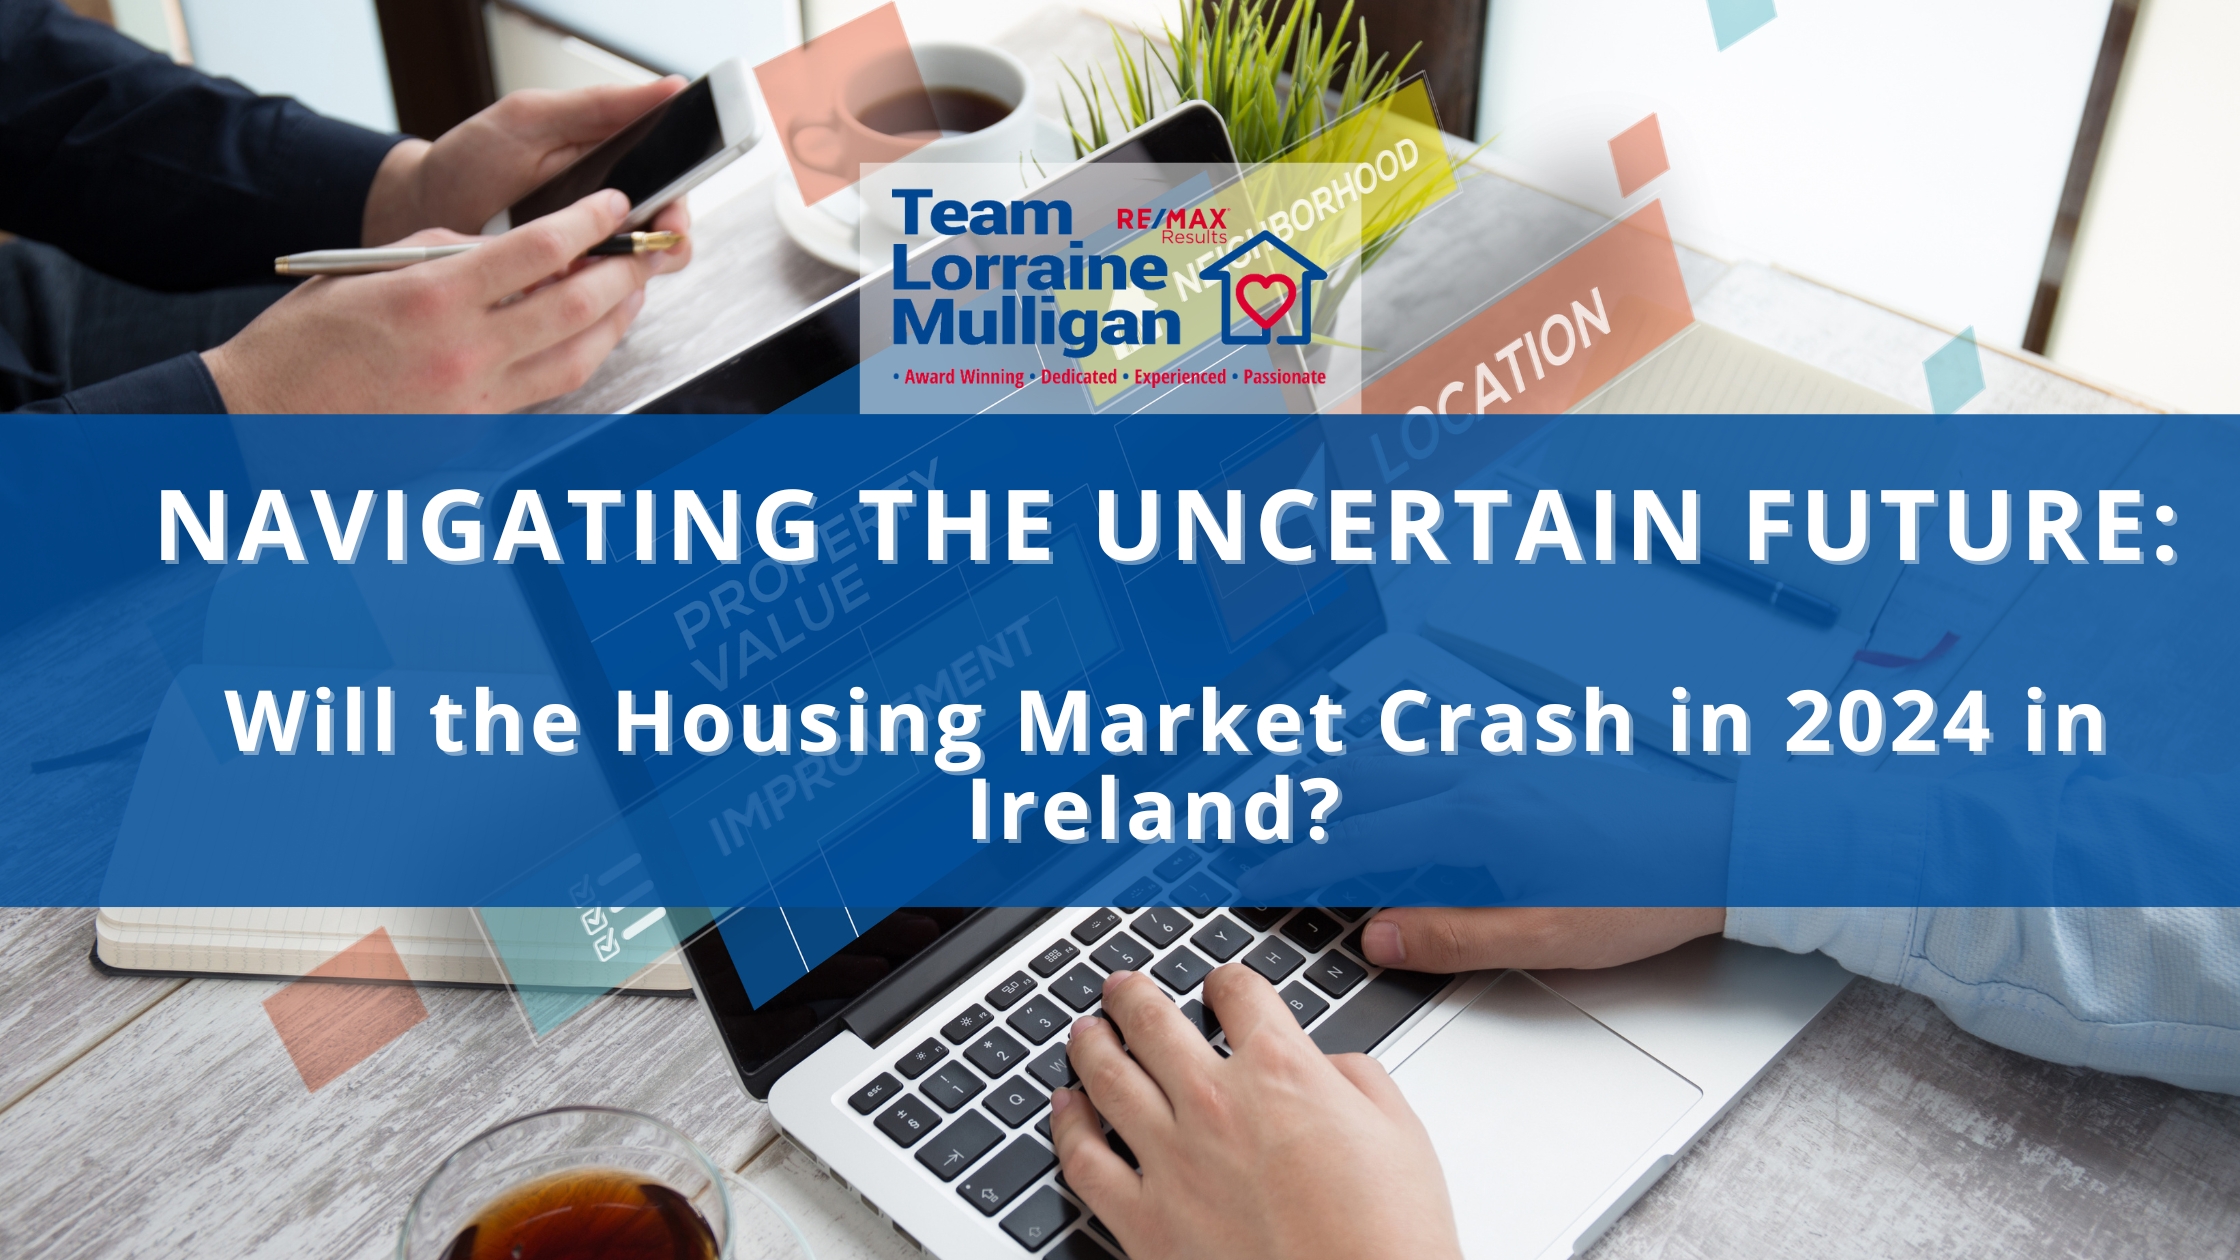 Navigating the Uncertain Future: Will the Housing Market Crash in 2024 in Ireland?  Here’s what TLM think…